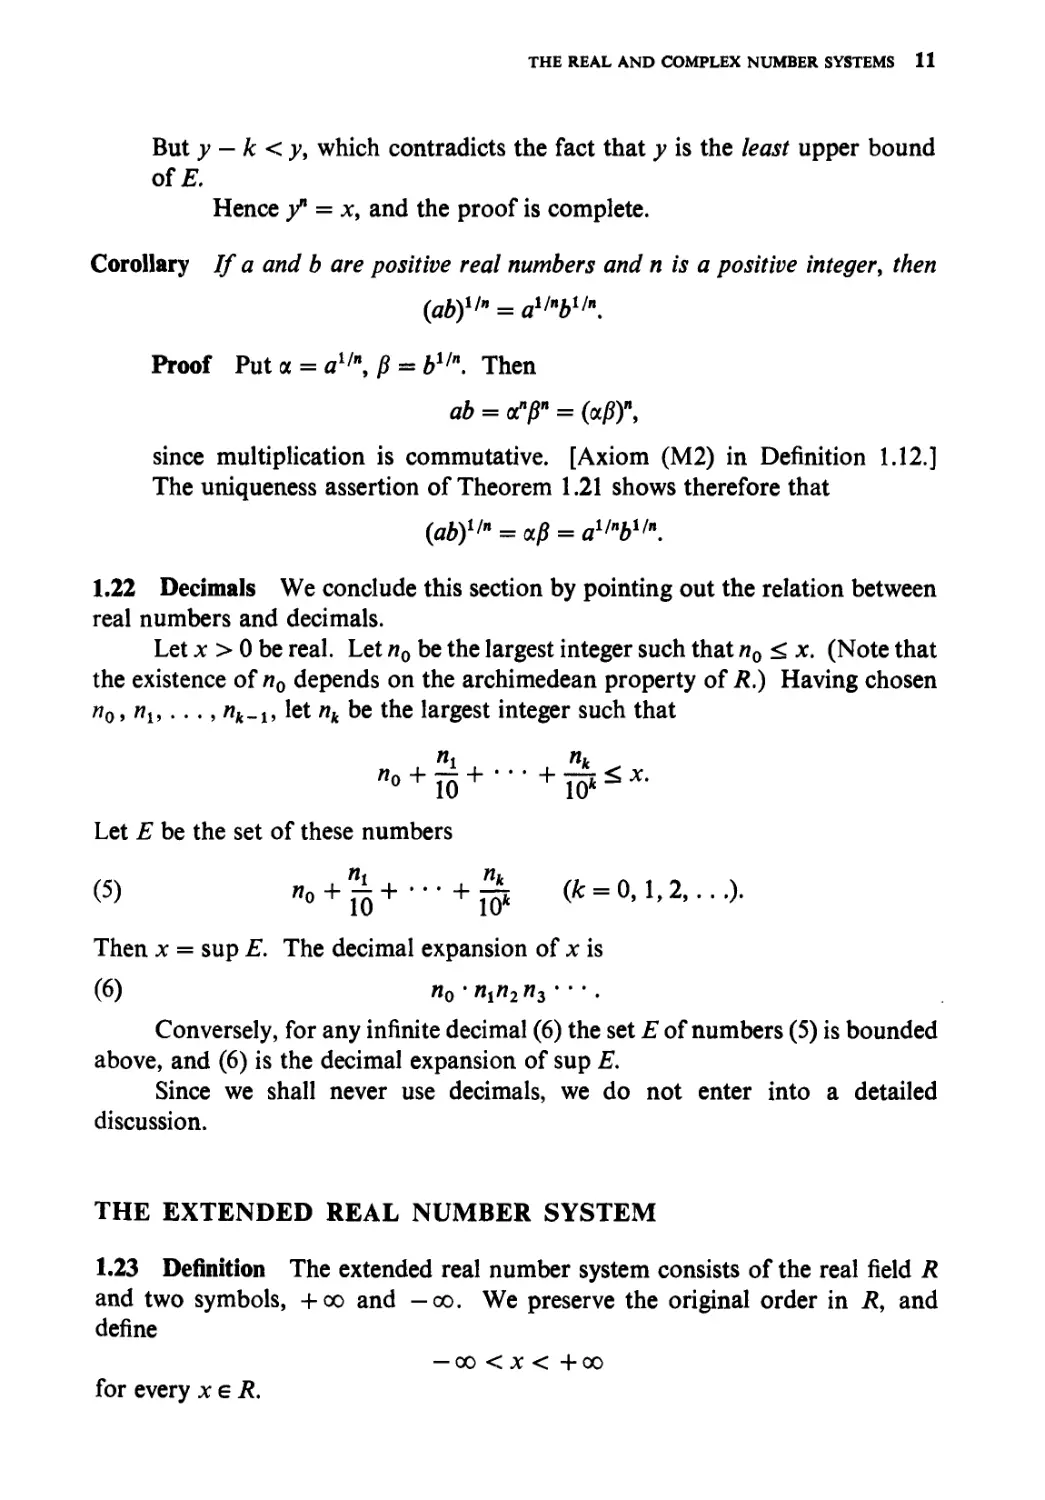 The Extended Real Number System